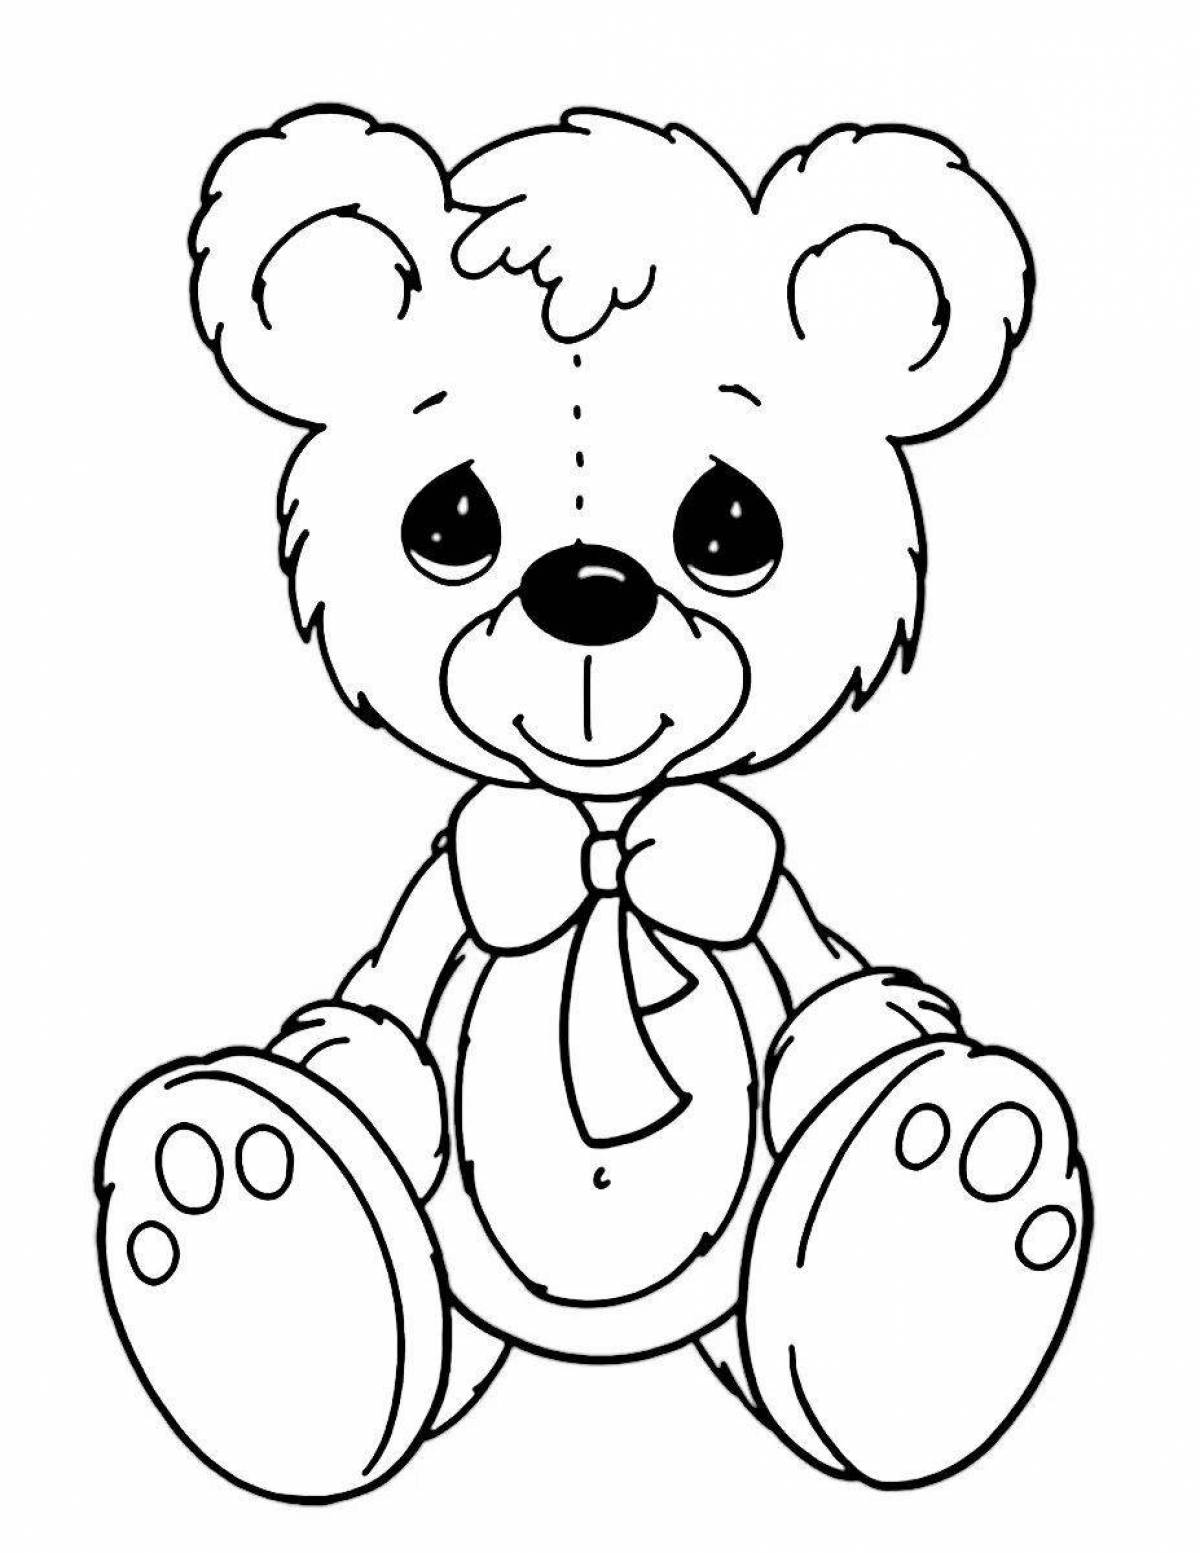 Coloring of a winking teddy bear